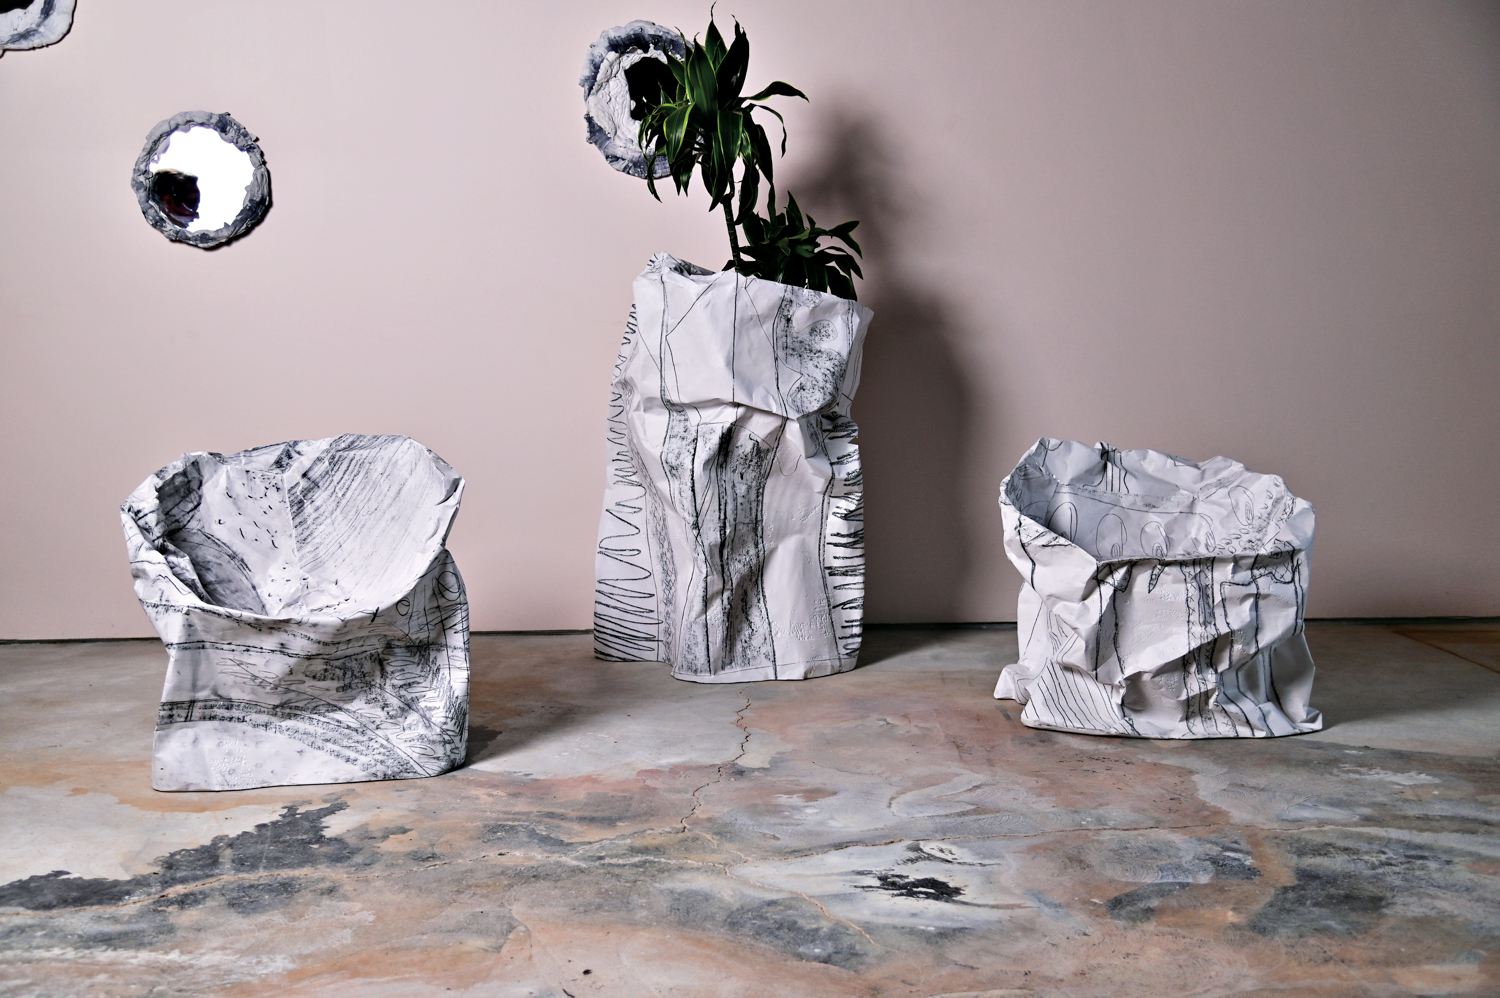 Check Out These Outdoor Furnishings That Resemble Crumpled Paper